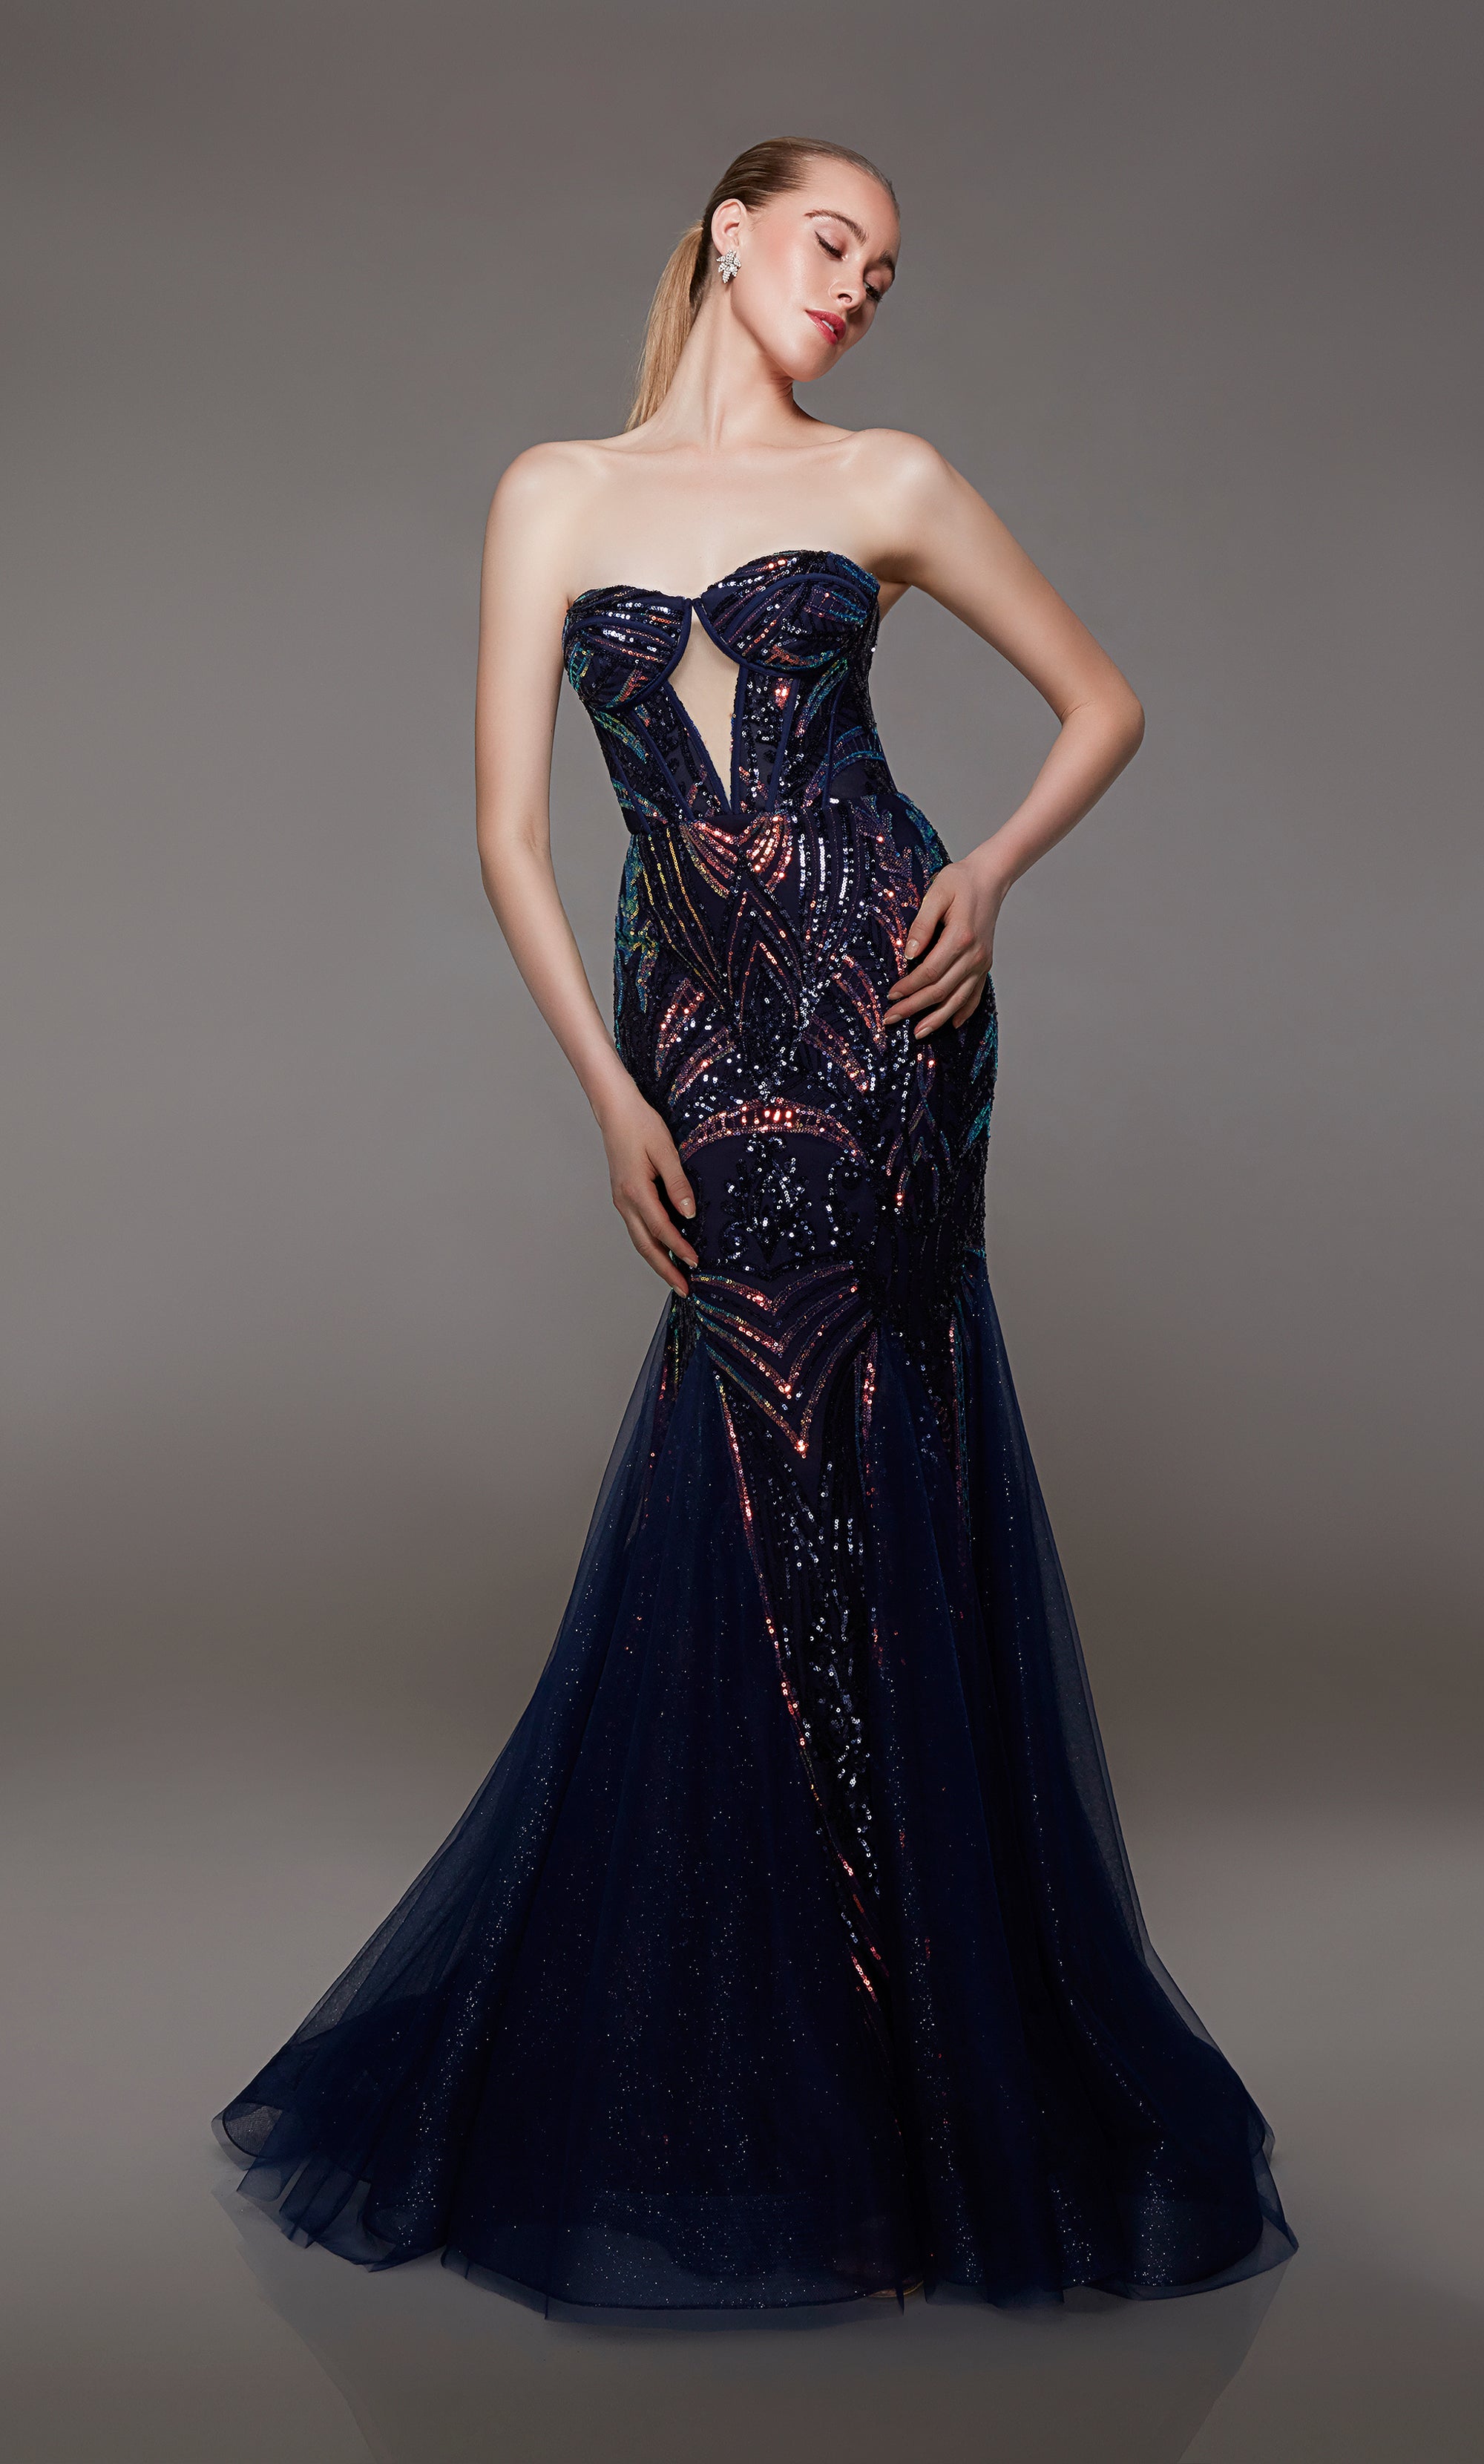 Navy blue mermaid dress: Strapless neckline, keyhole cutout, playful iridescent sequin detail. Back features an lace-up closure for the perfect fit.